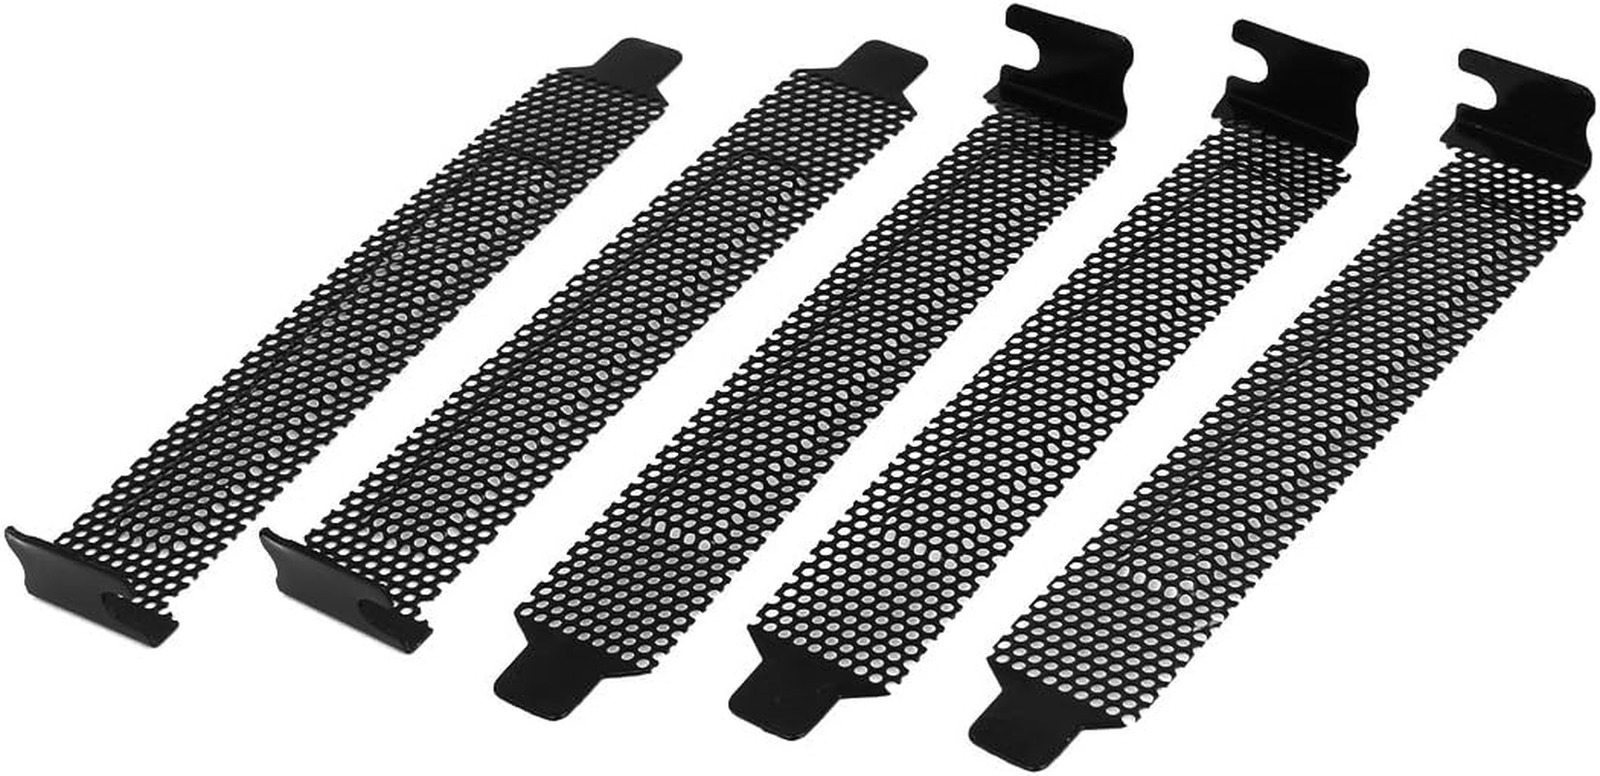 5 Pieces PCI Slot Cover Black Hard Steel Dust Filter Blanking Plate with Screws,